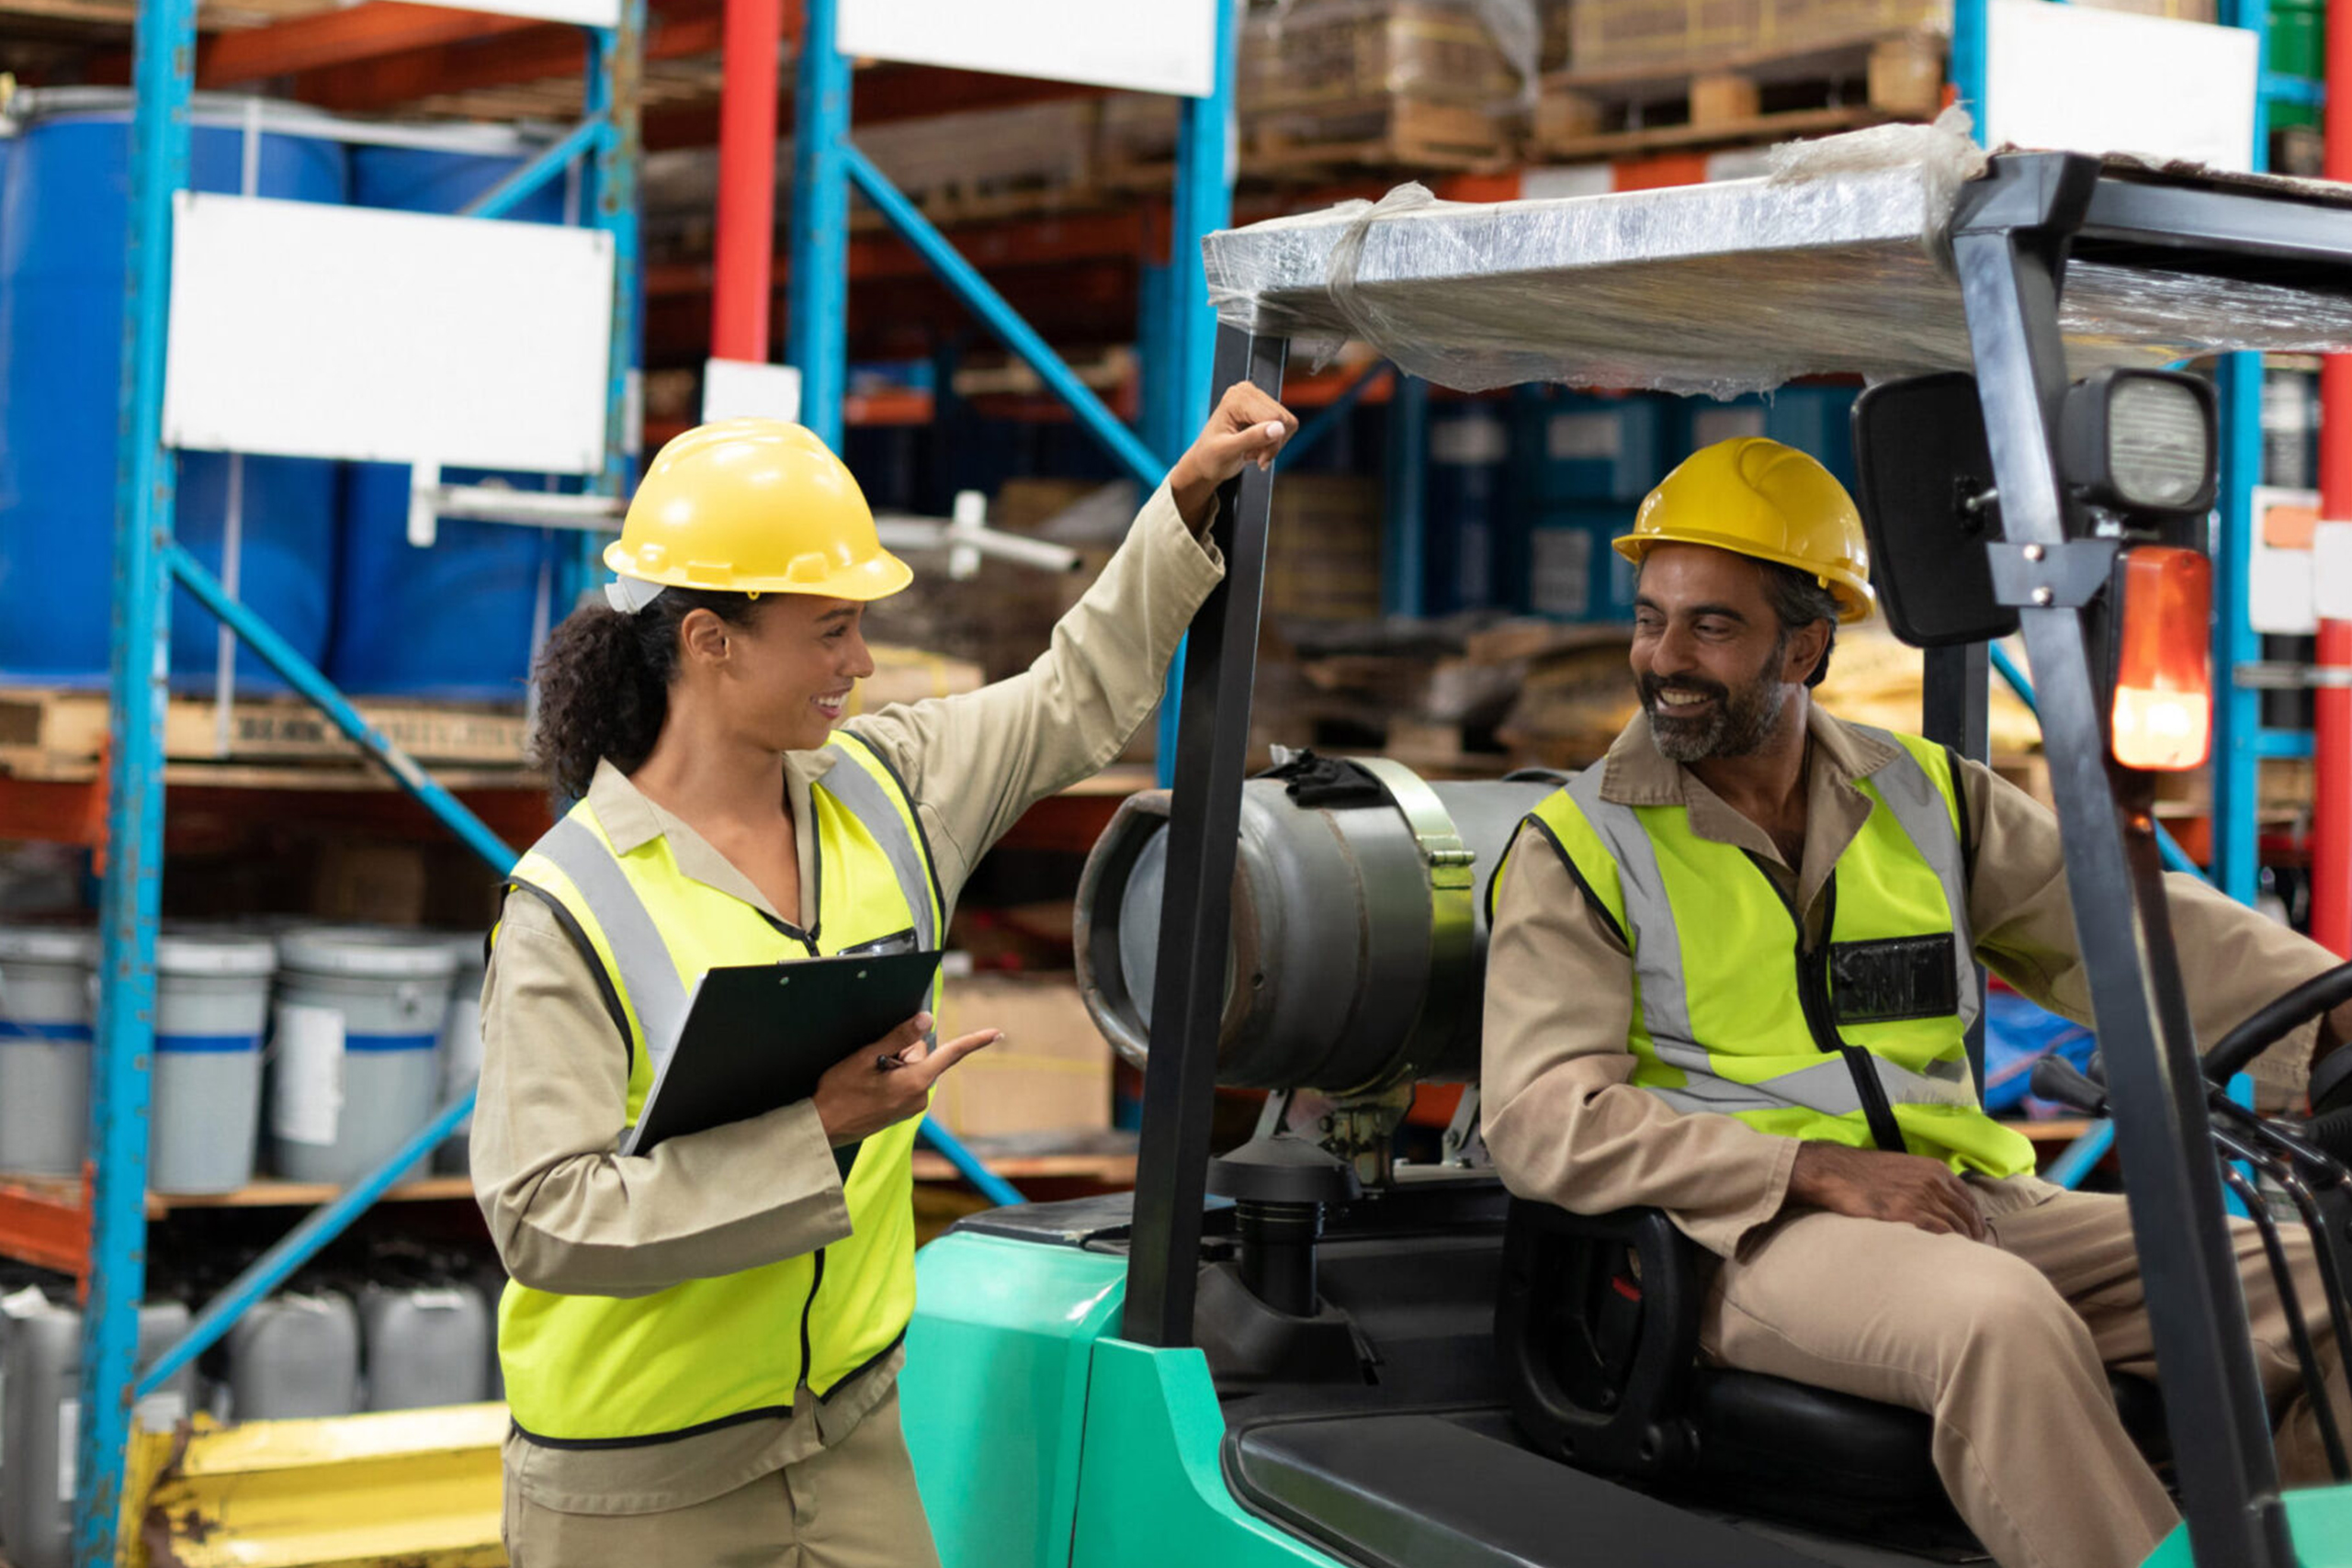 Happy male and female staff interacting with each other in warehouse. This is a freight transportation and distribution warehouse. Industrial and industrial workers concept